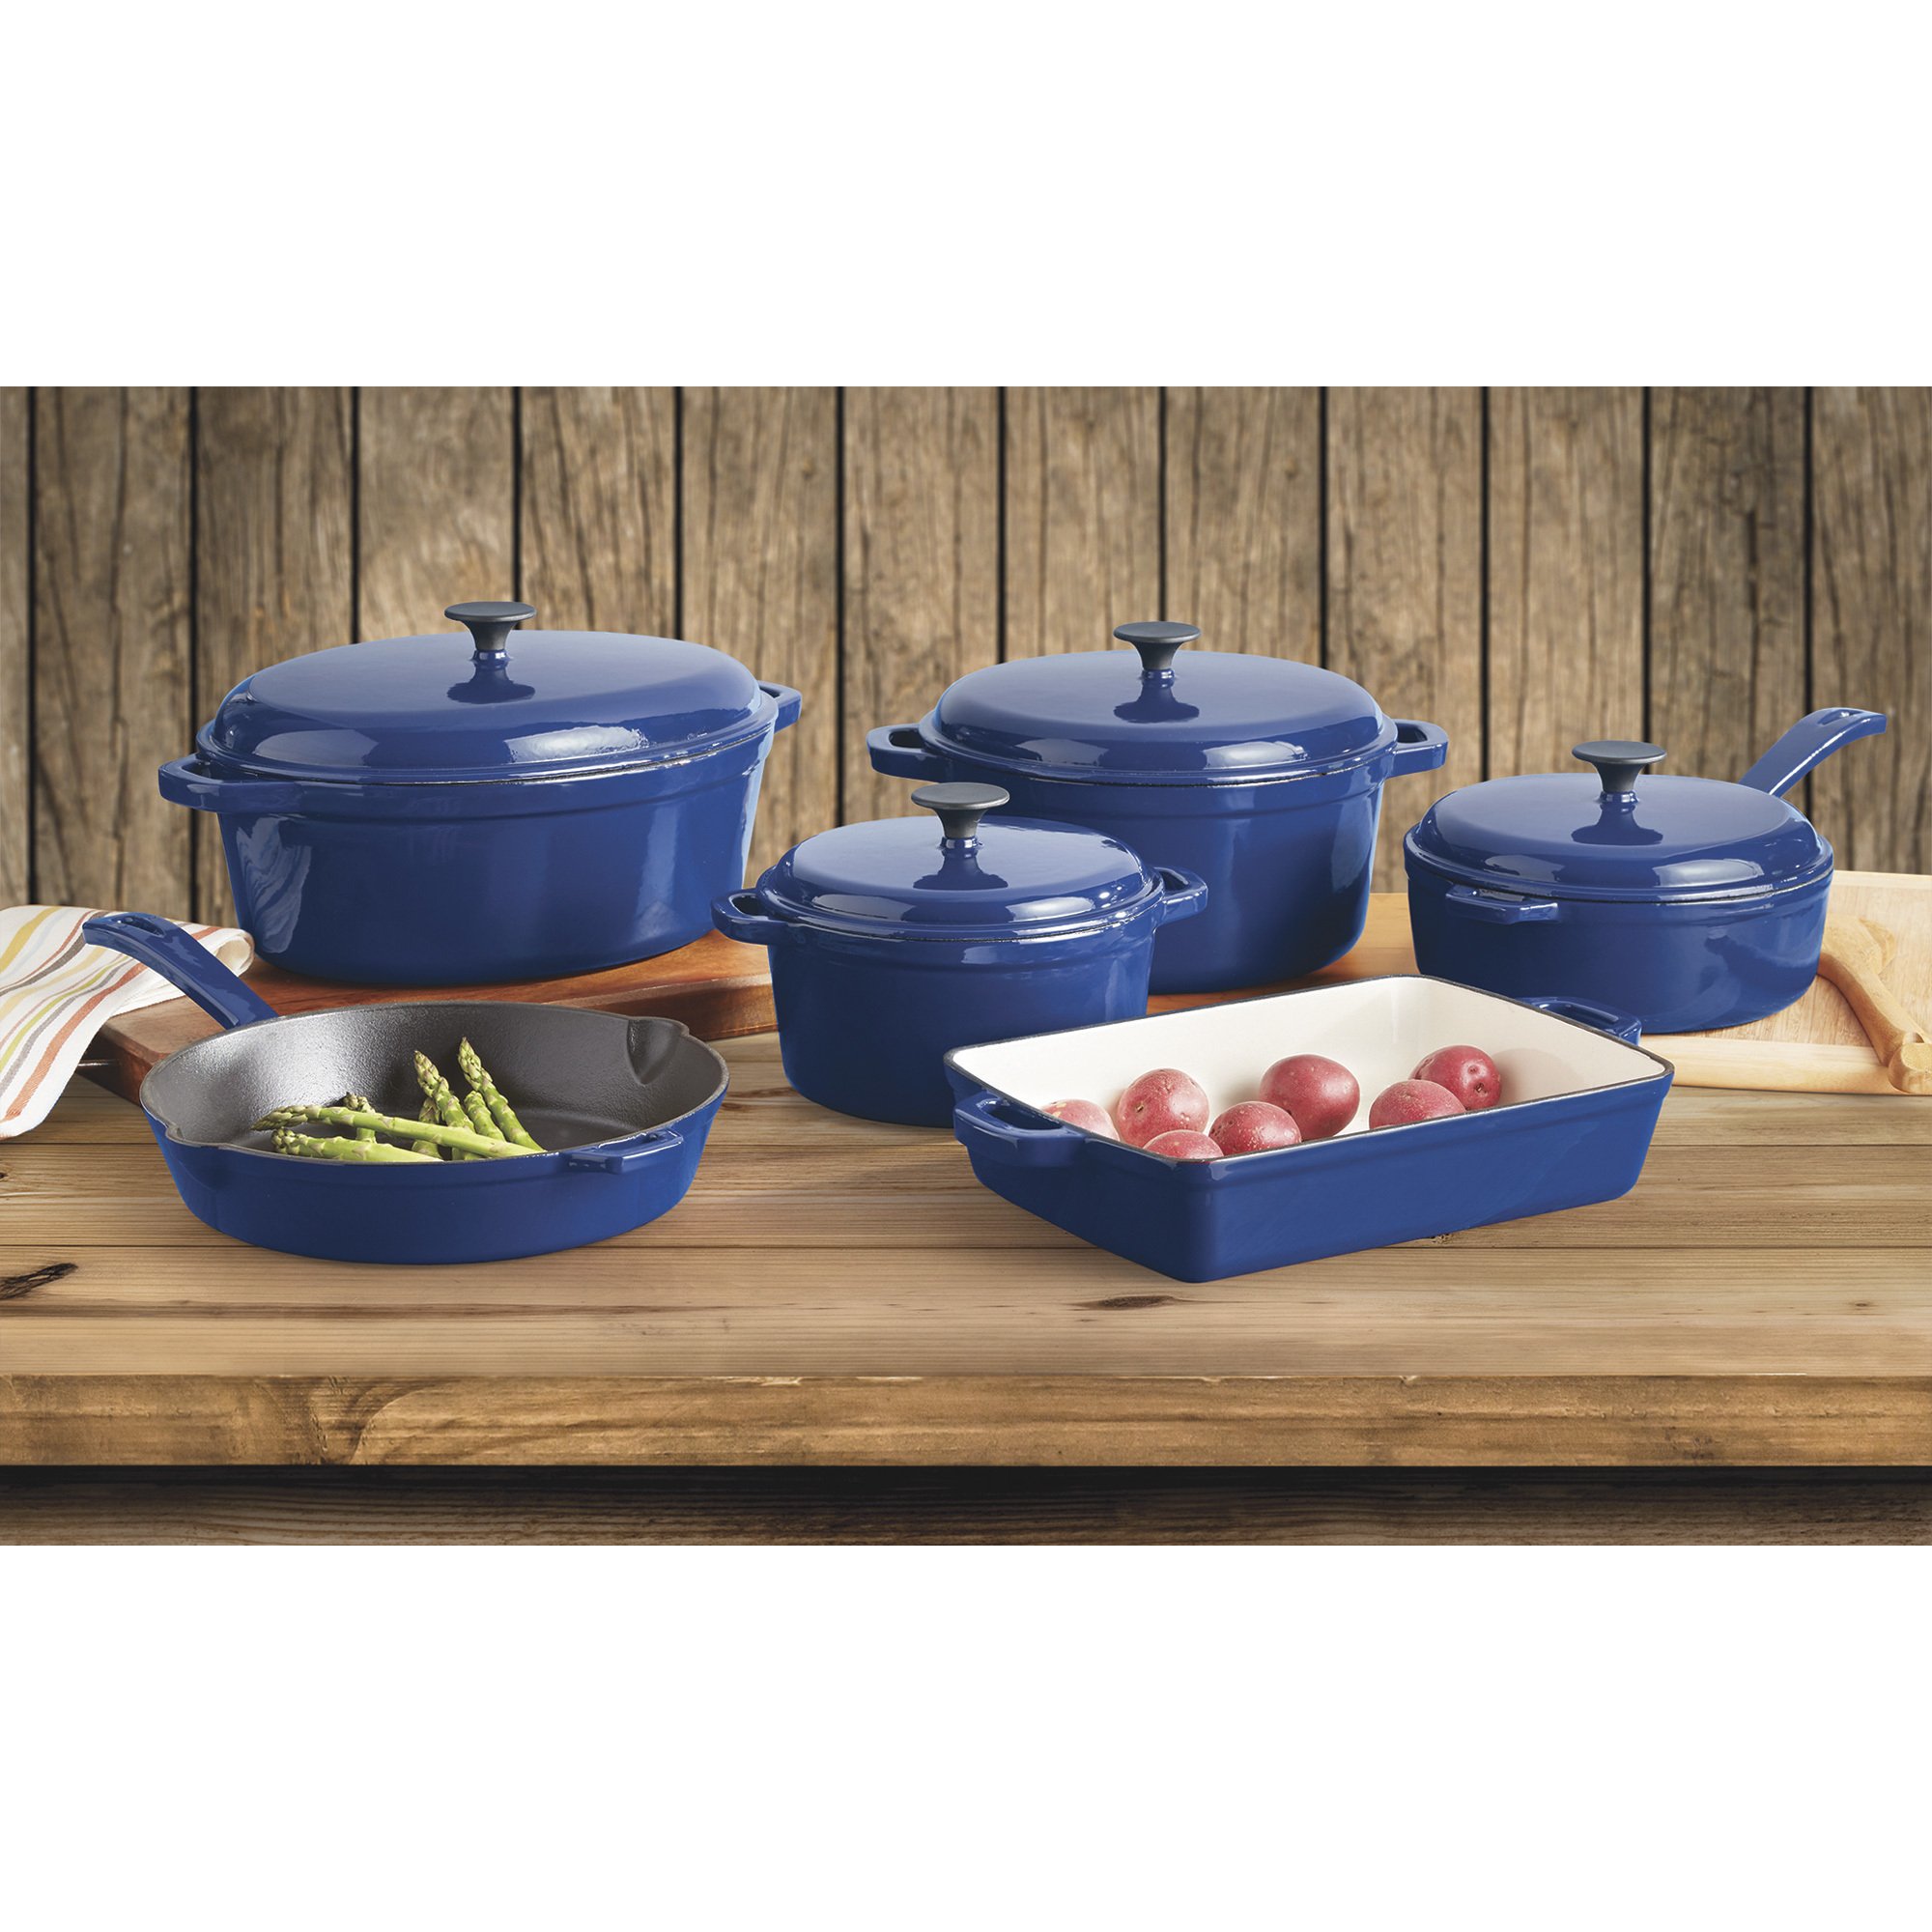 SHYIS 5.5 Quart Enameled Cast Iron Dutch Oven,2-In-1 Enamel Dutch Oven with  Skillet Lid for Grill,Stovetop,Induction (Klein Blue)